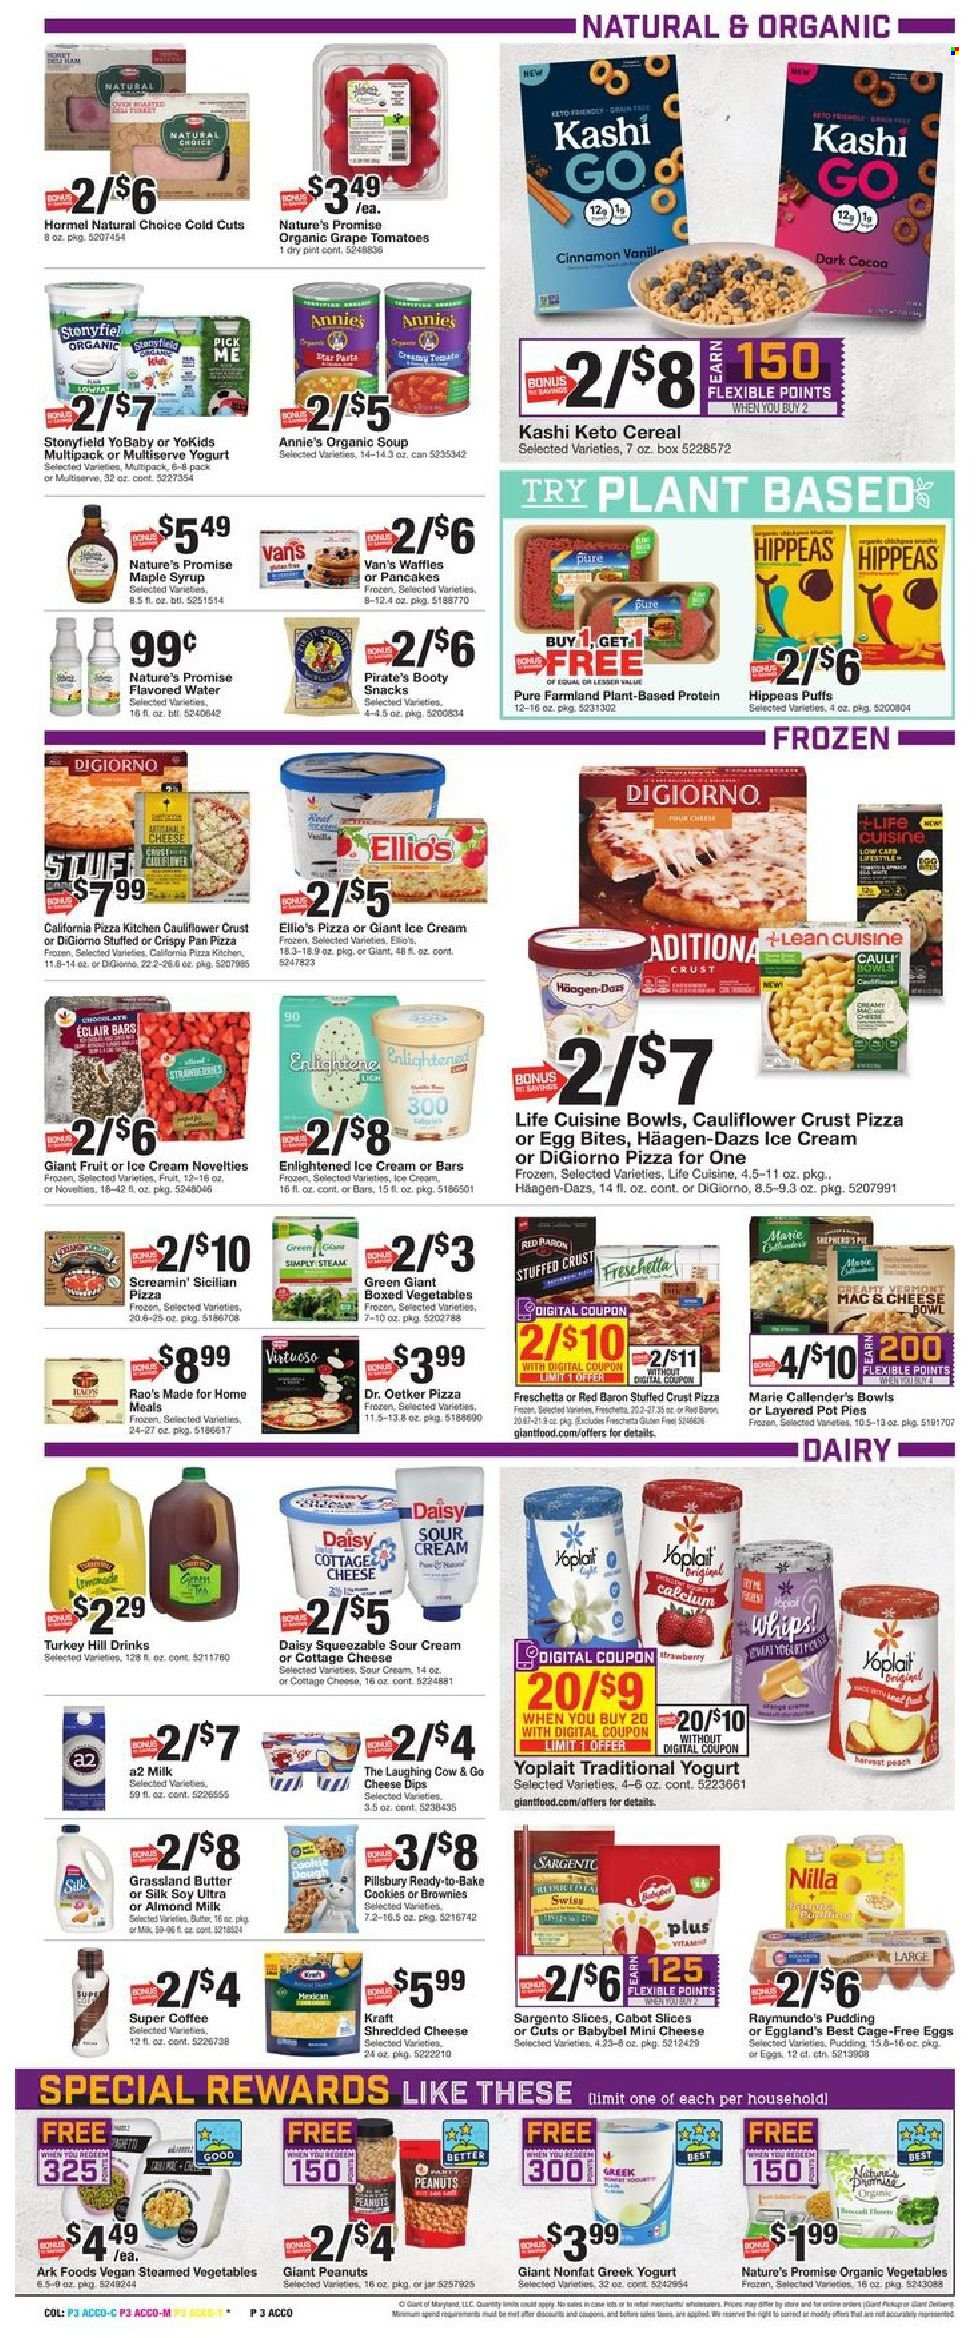 thumbnail - Giant Food Flyer - 01/14/2022 - 01/20/2022 - Sales products - Nature’s Promise, pot pie, puffs, brownies, waffles, pizza, soup, Pillsbury, Lean Cuisine, Marie Callender's, Annie's, Kraft®, Hormel, cottage cheese, shredded cheese, The Laughing Cow, Dr. Oetker, Babybel, Sargento, pudding, yoghurt, Yoplait, almond milk, Silk, cage free eggs, butter, sour cream, ice cream, Häagen-Dazs, Enlightened lce Cream, Screamin' Sicilian, Red Baron, cookies, snack, cocoa, cereals, cinnamon, maple syrup, syrup, peanuts, flavored water, coffee, pan, jar. Page 3.